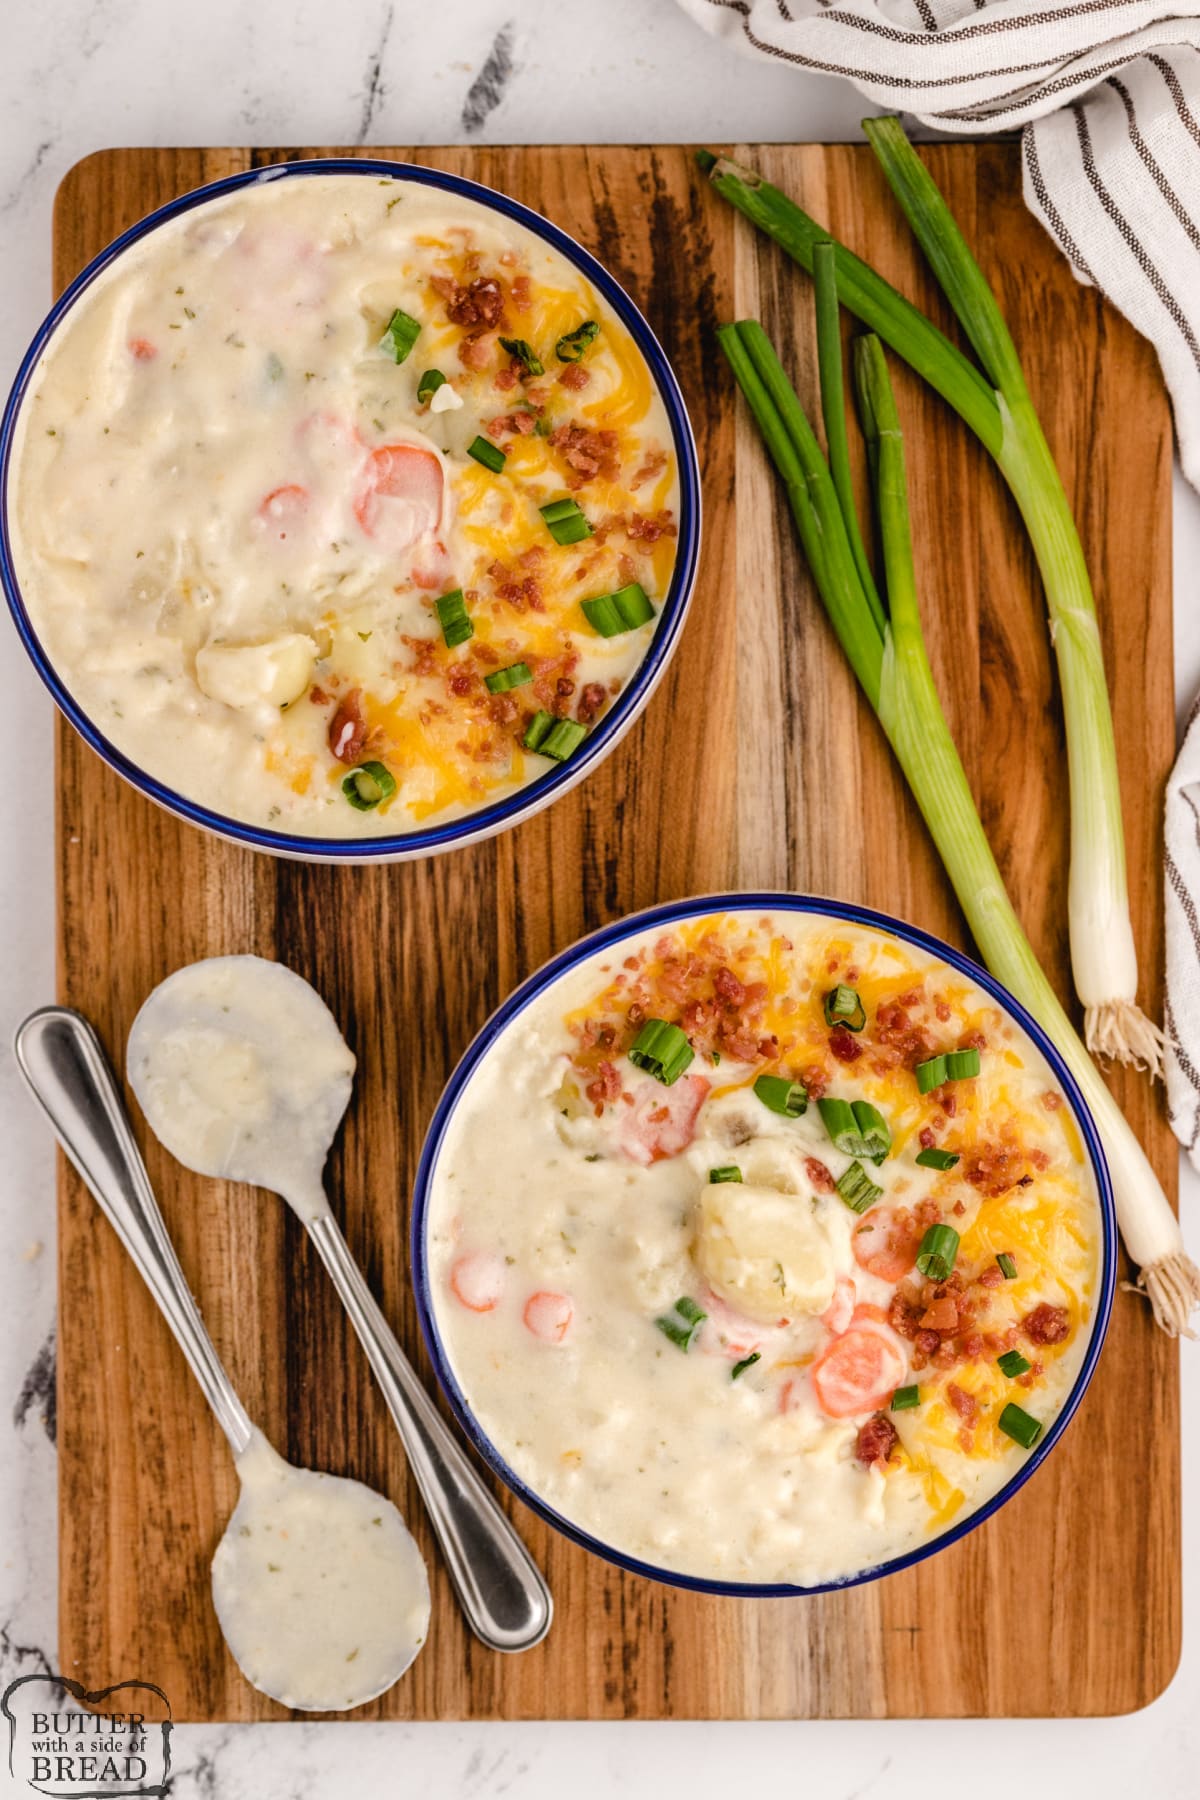 Bowls filled with potato cheese soup